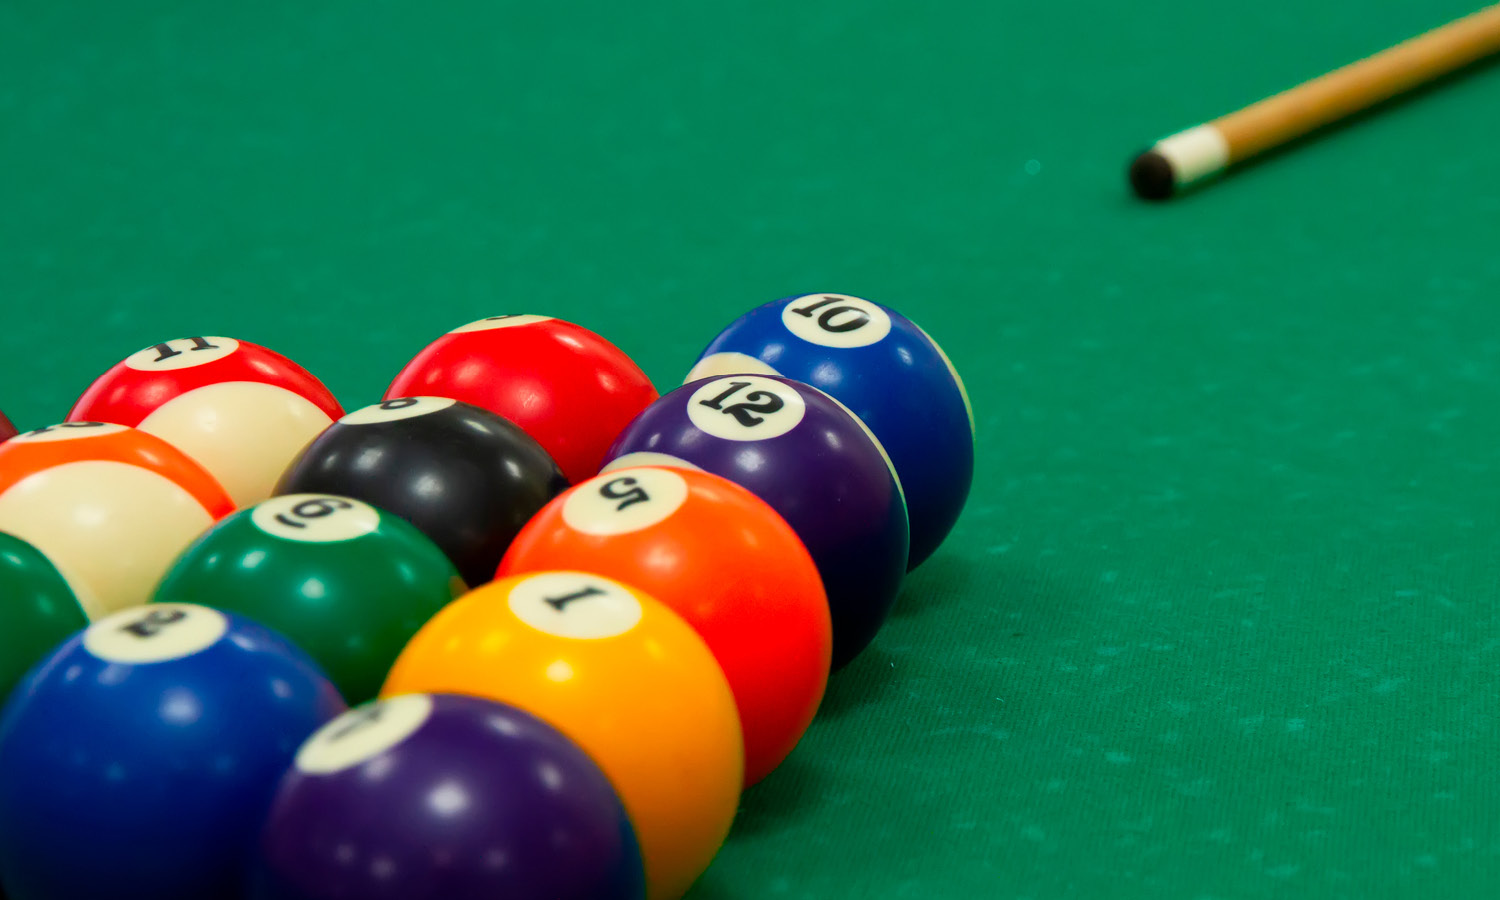 Pool table with balls and cue